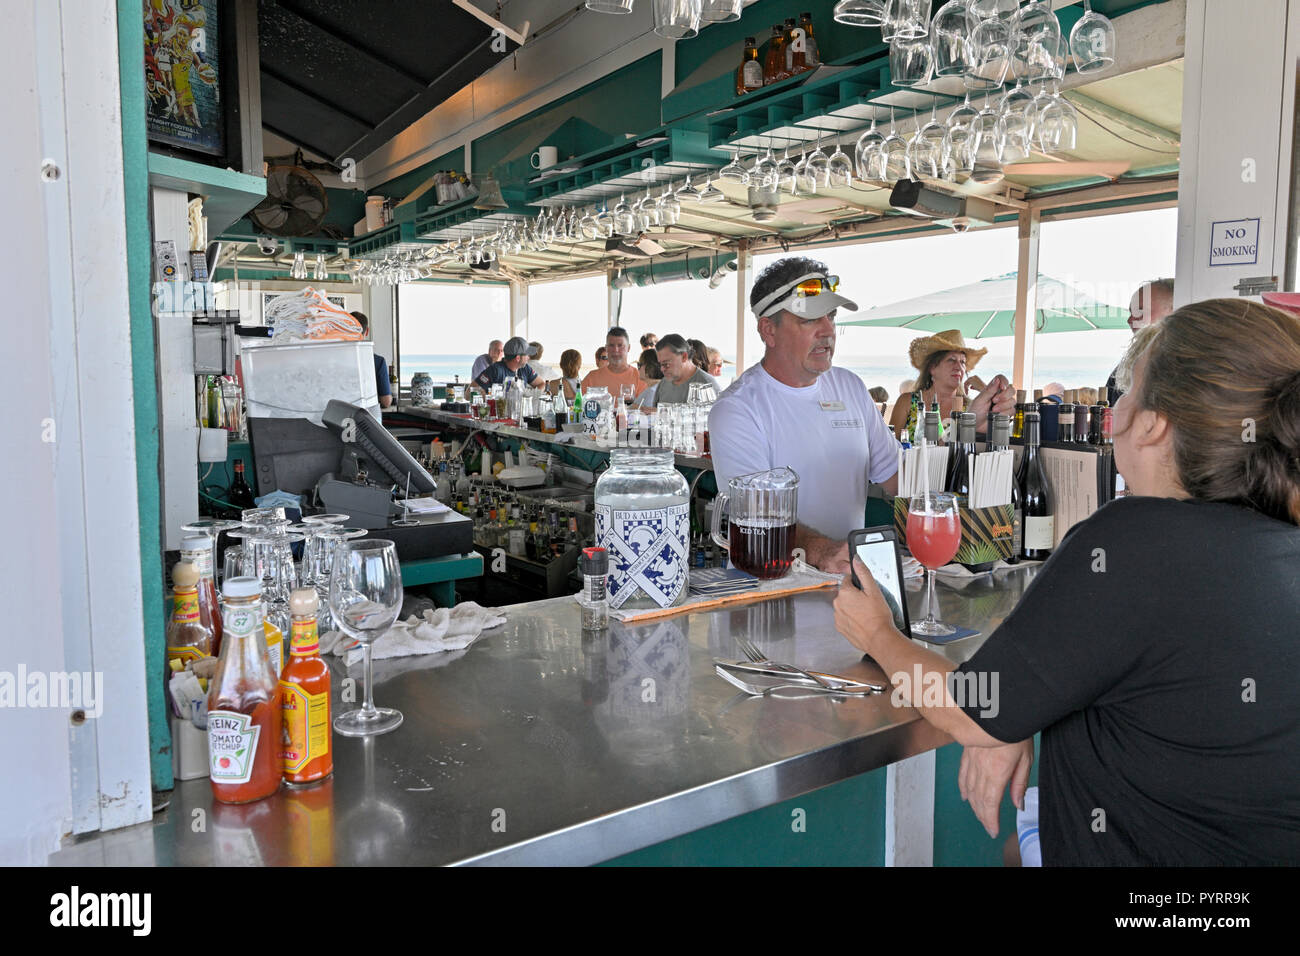 Male bartender behind the bar at the busy rooftop bar and restaurant or grill of Bud and Alley's in the Florida panhandle beach town of Seaside, USA. Stock Photo